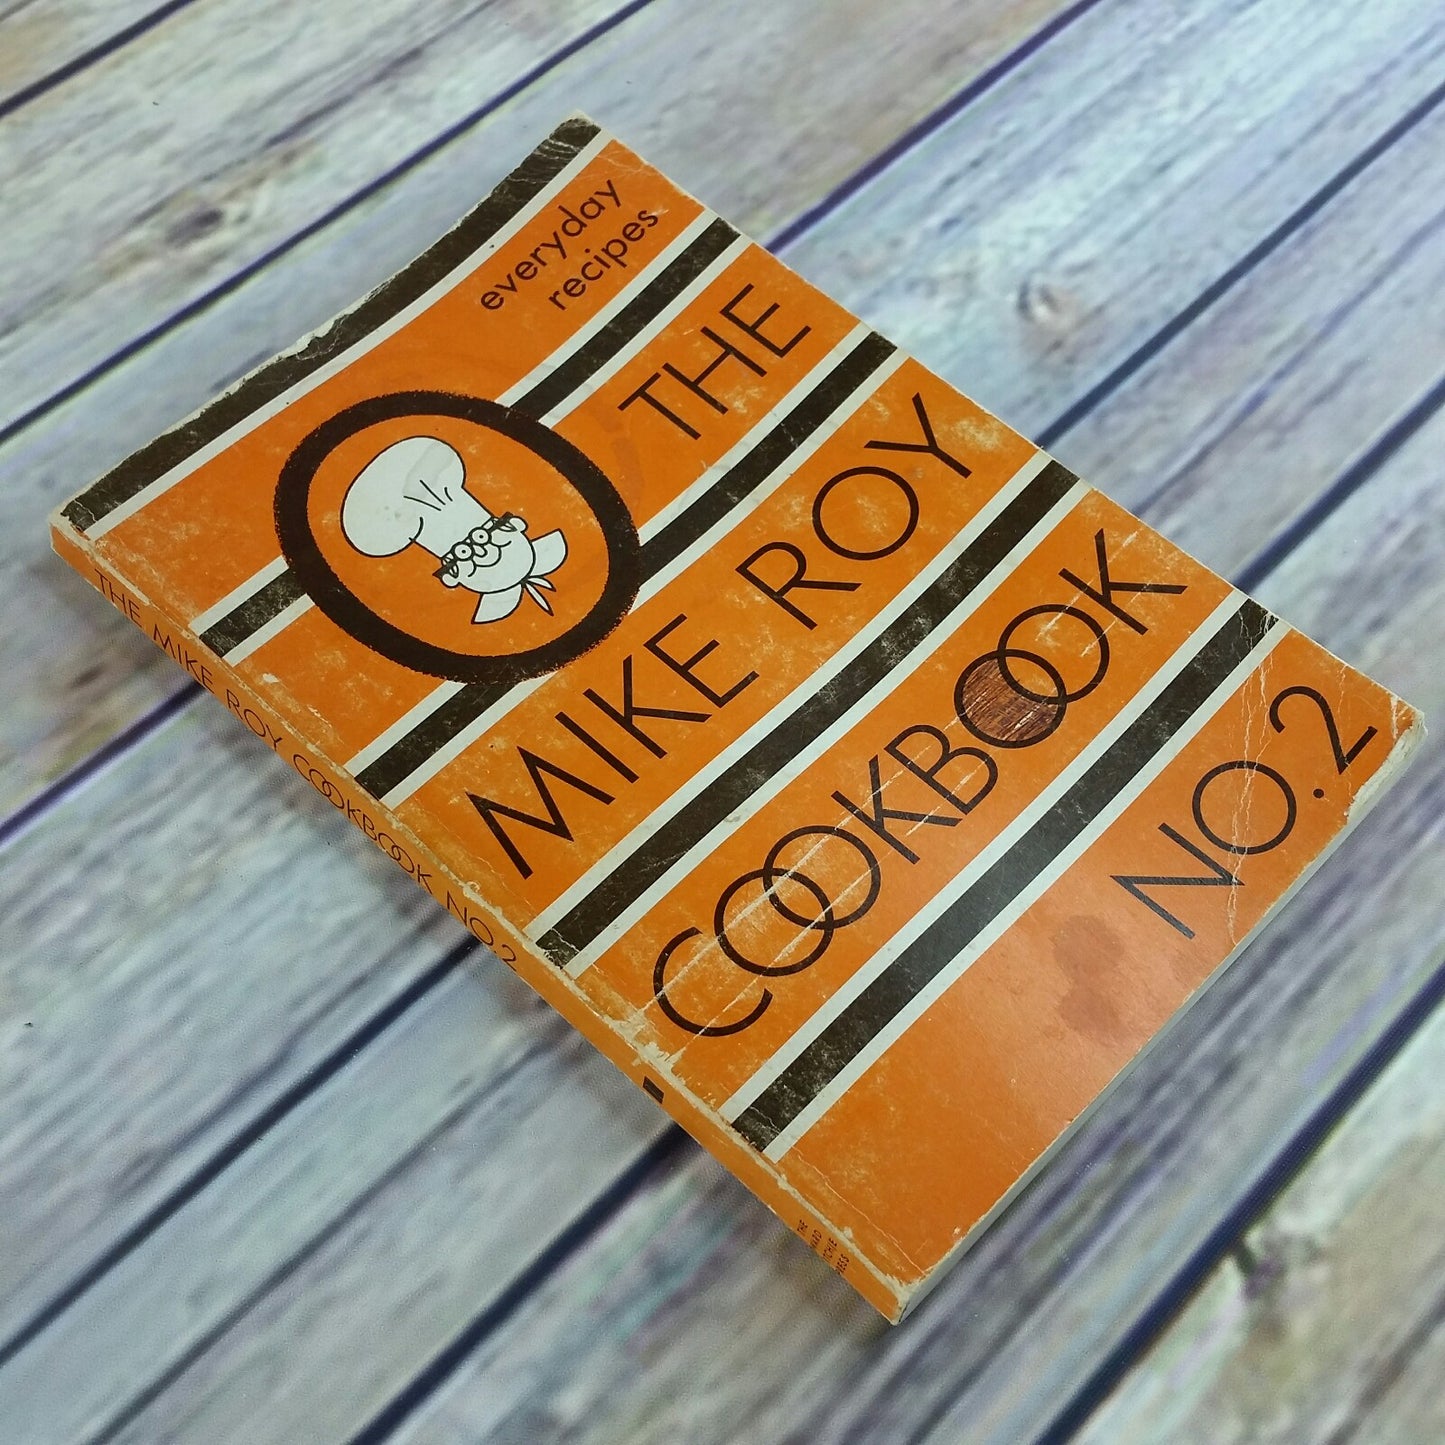 Vintage Mike Roy Cook Book Cooking Show Host Chef 1970 Book 2 Everyday Recipes Paperback - At Grandma's Table